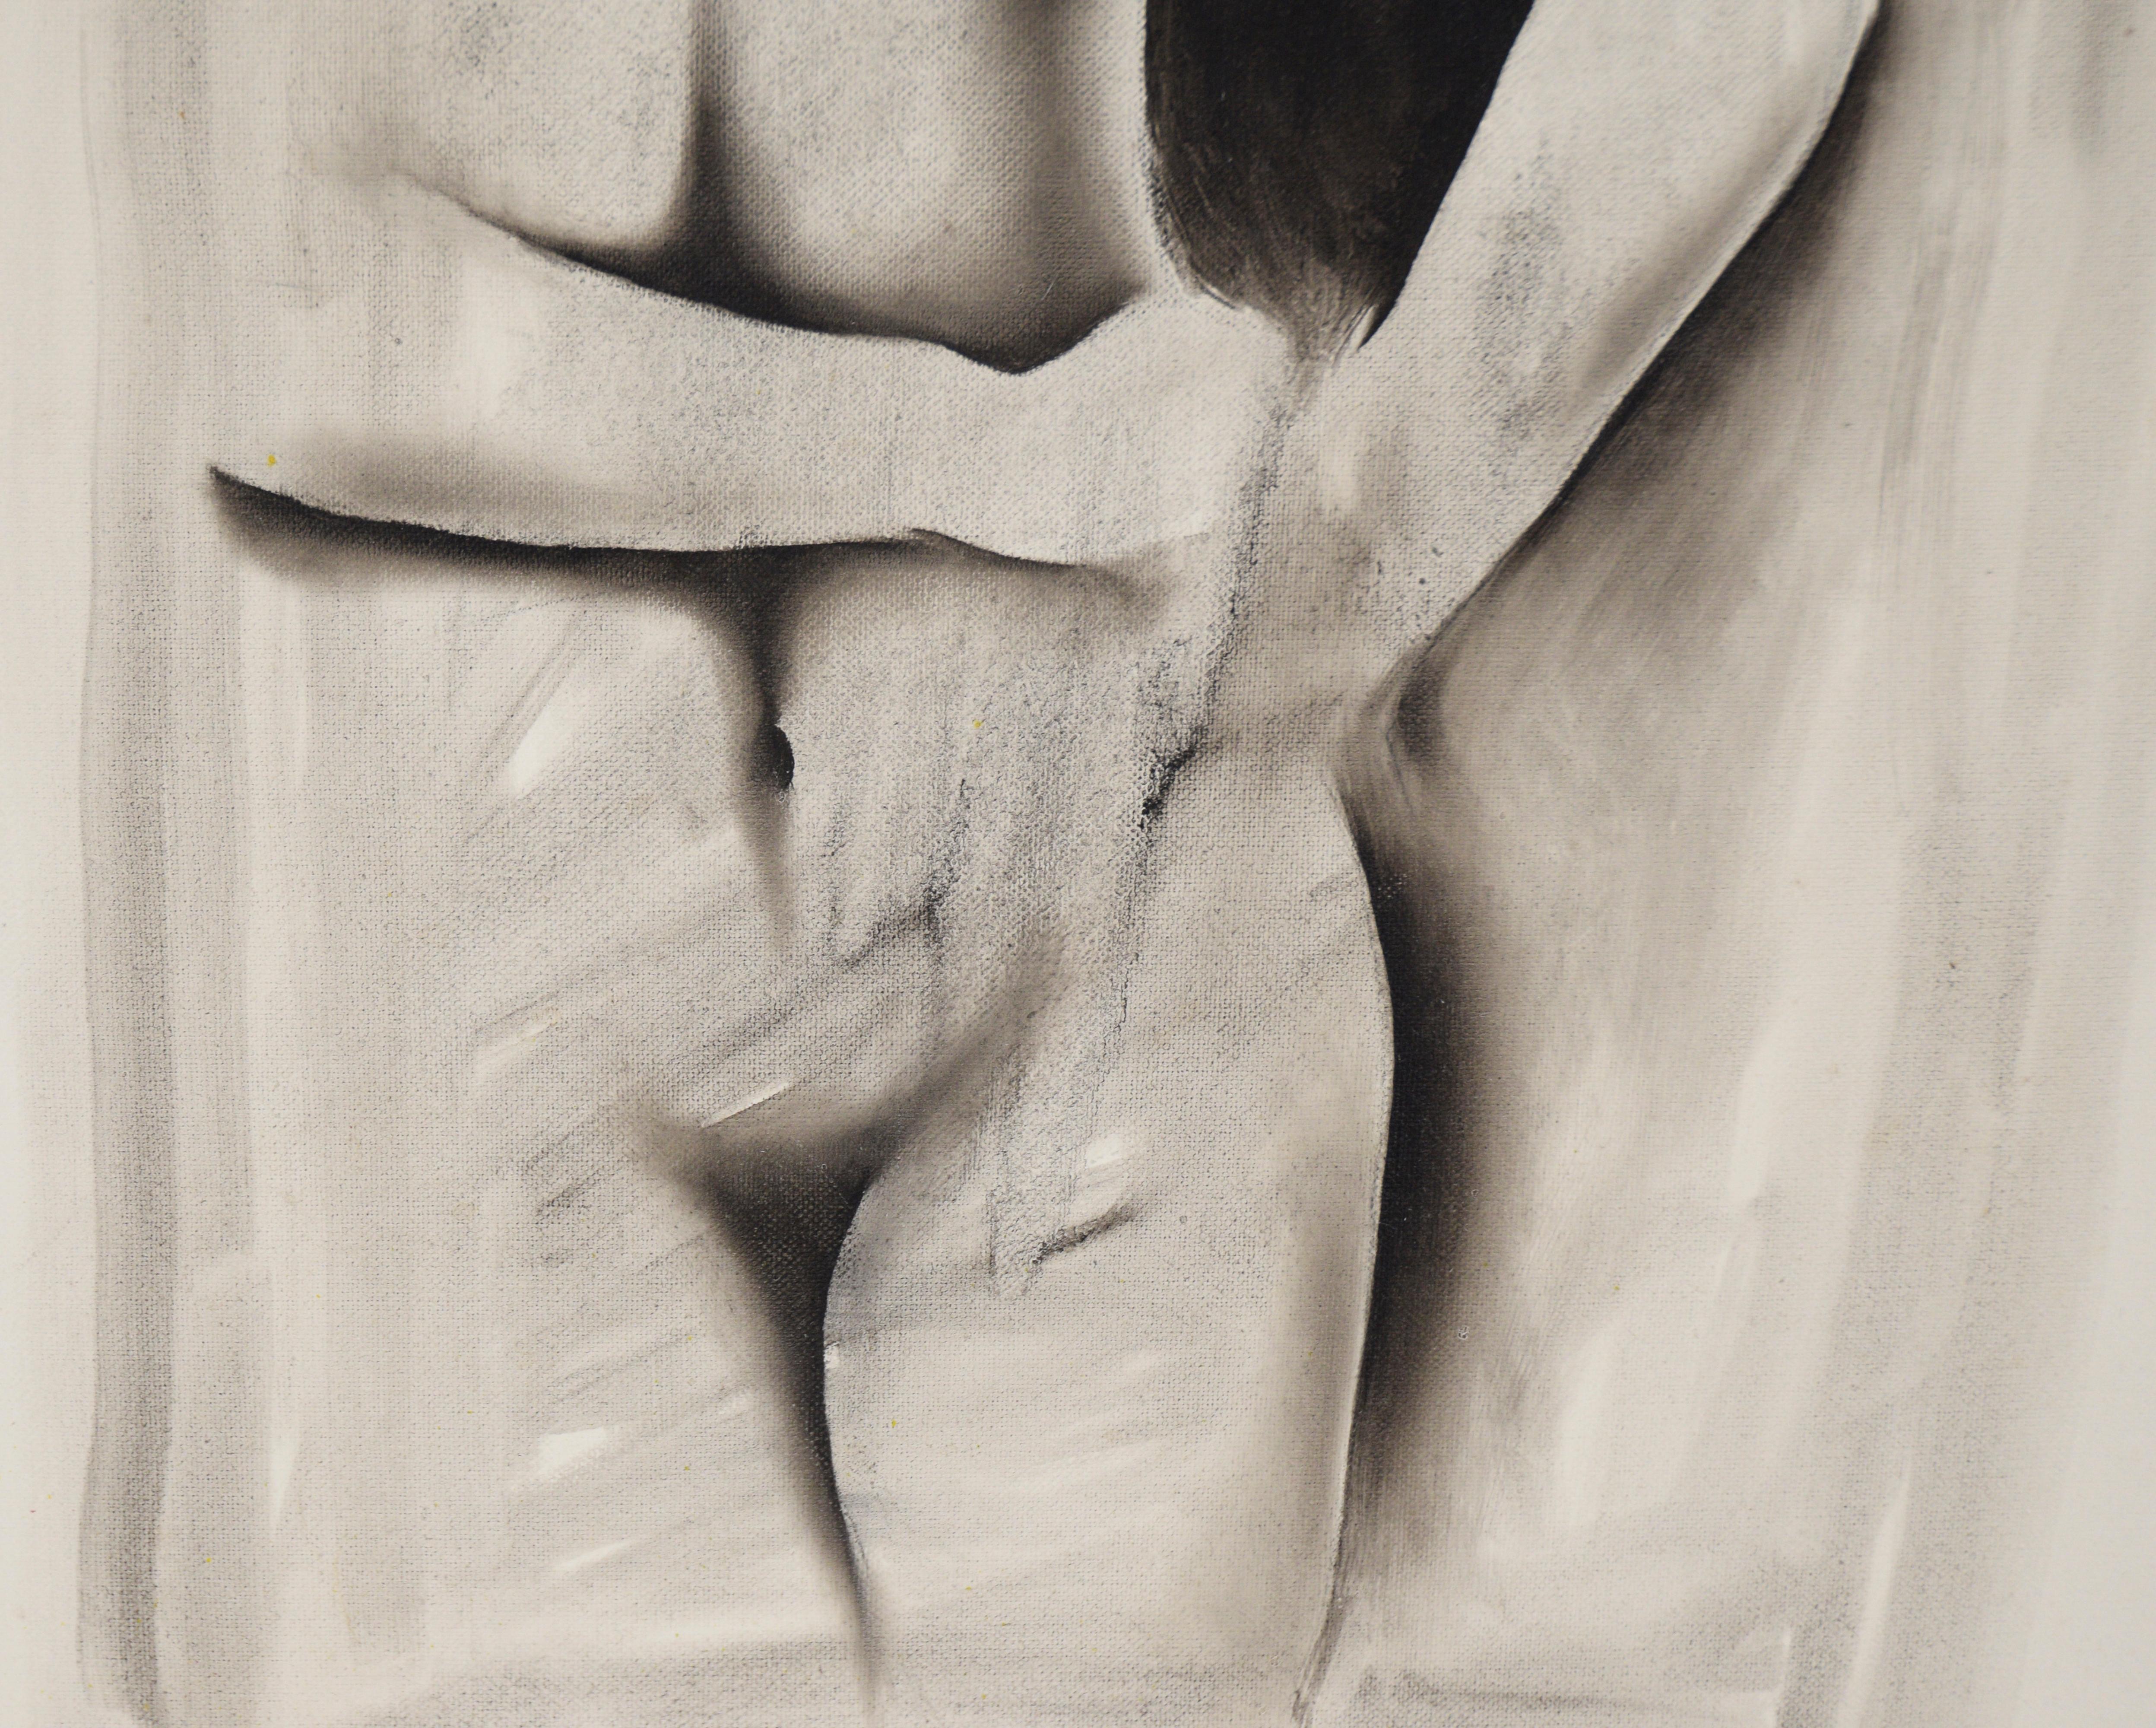 Black and White Figurative Nude - Oil on Canvas

Black and white figurative nude by F Vasquez (20th C). The nude torso of a woman takes up the canvas. Her right hand is on her hip while her left hand is placed above. Contrasts of blacks, whites and